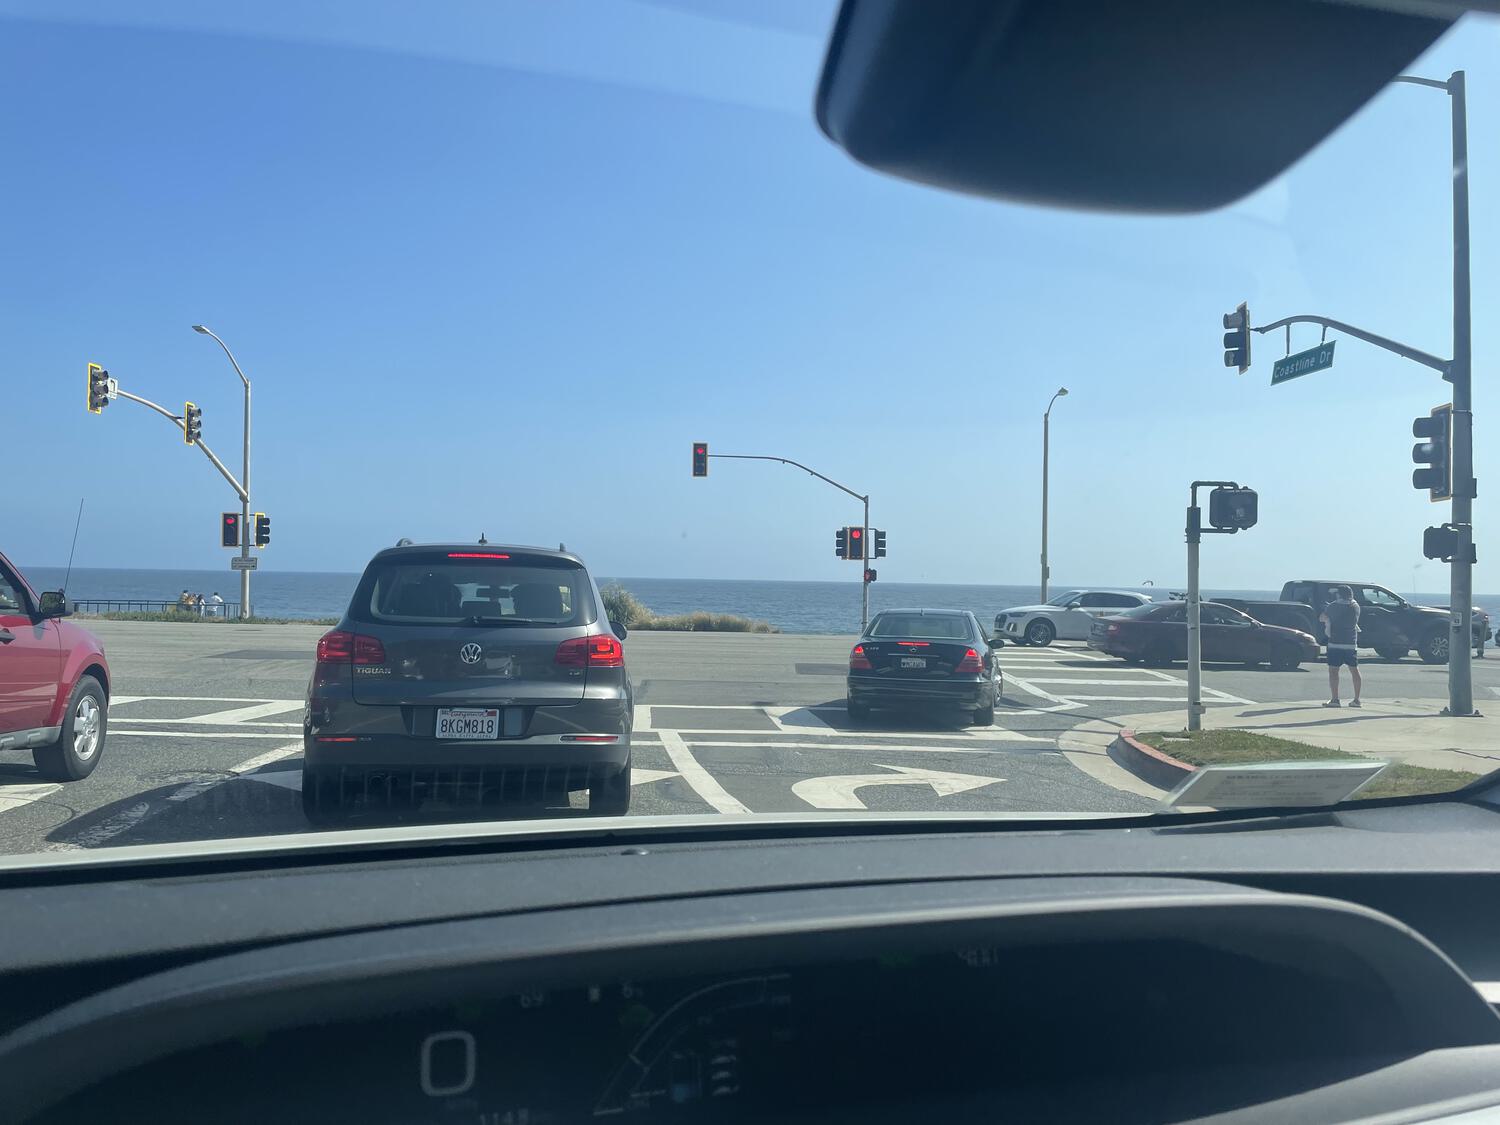 The Pacific Ocean as seen from a passing car